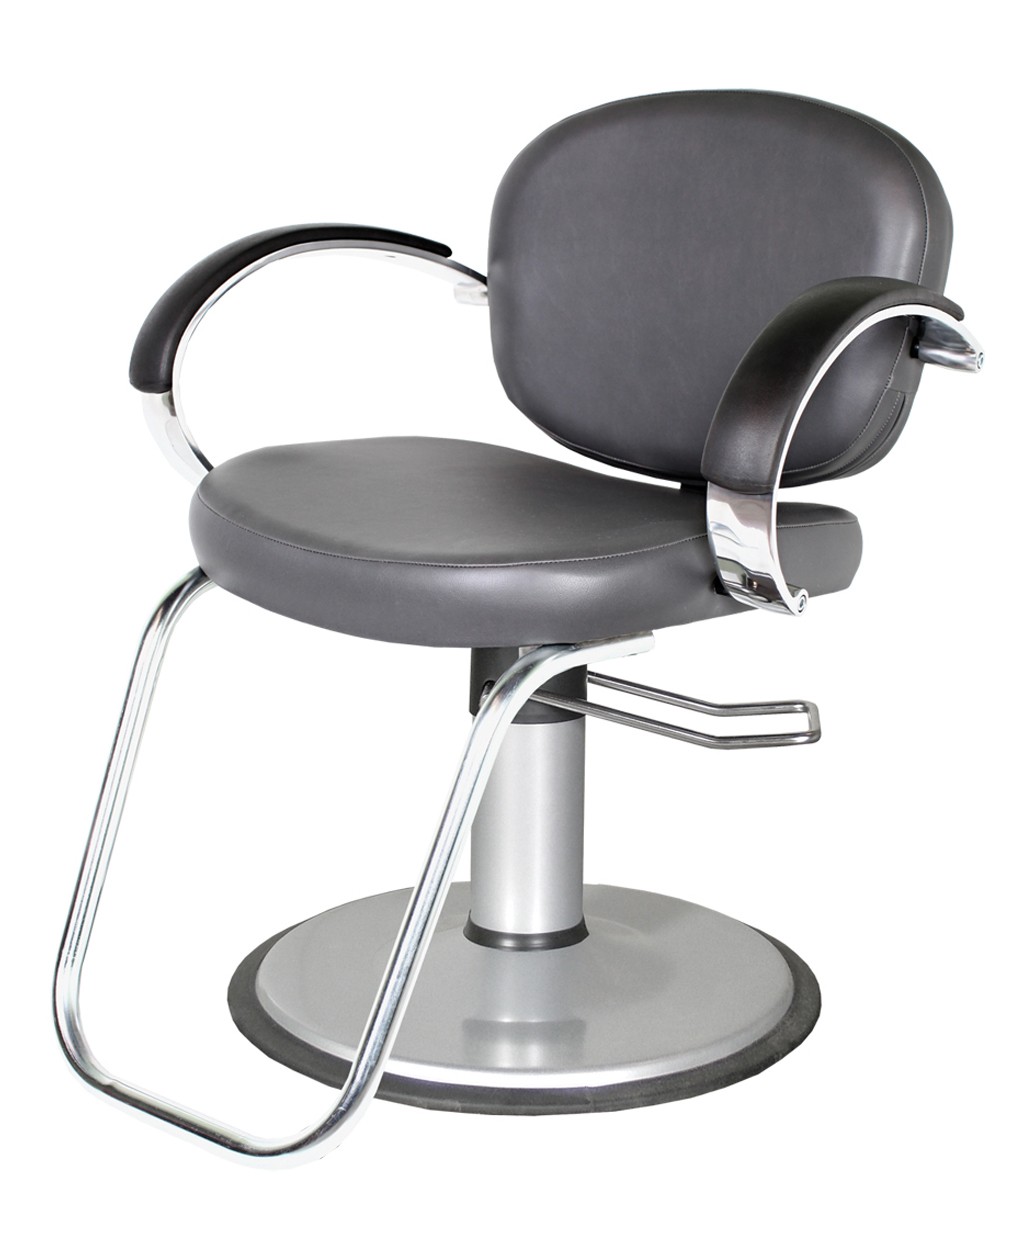 Collins QSE 1300 Valenti Styling Chair